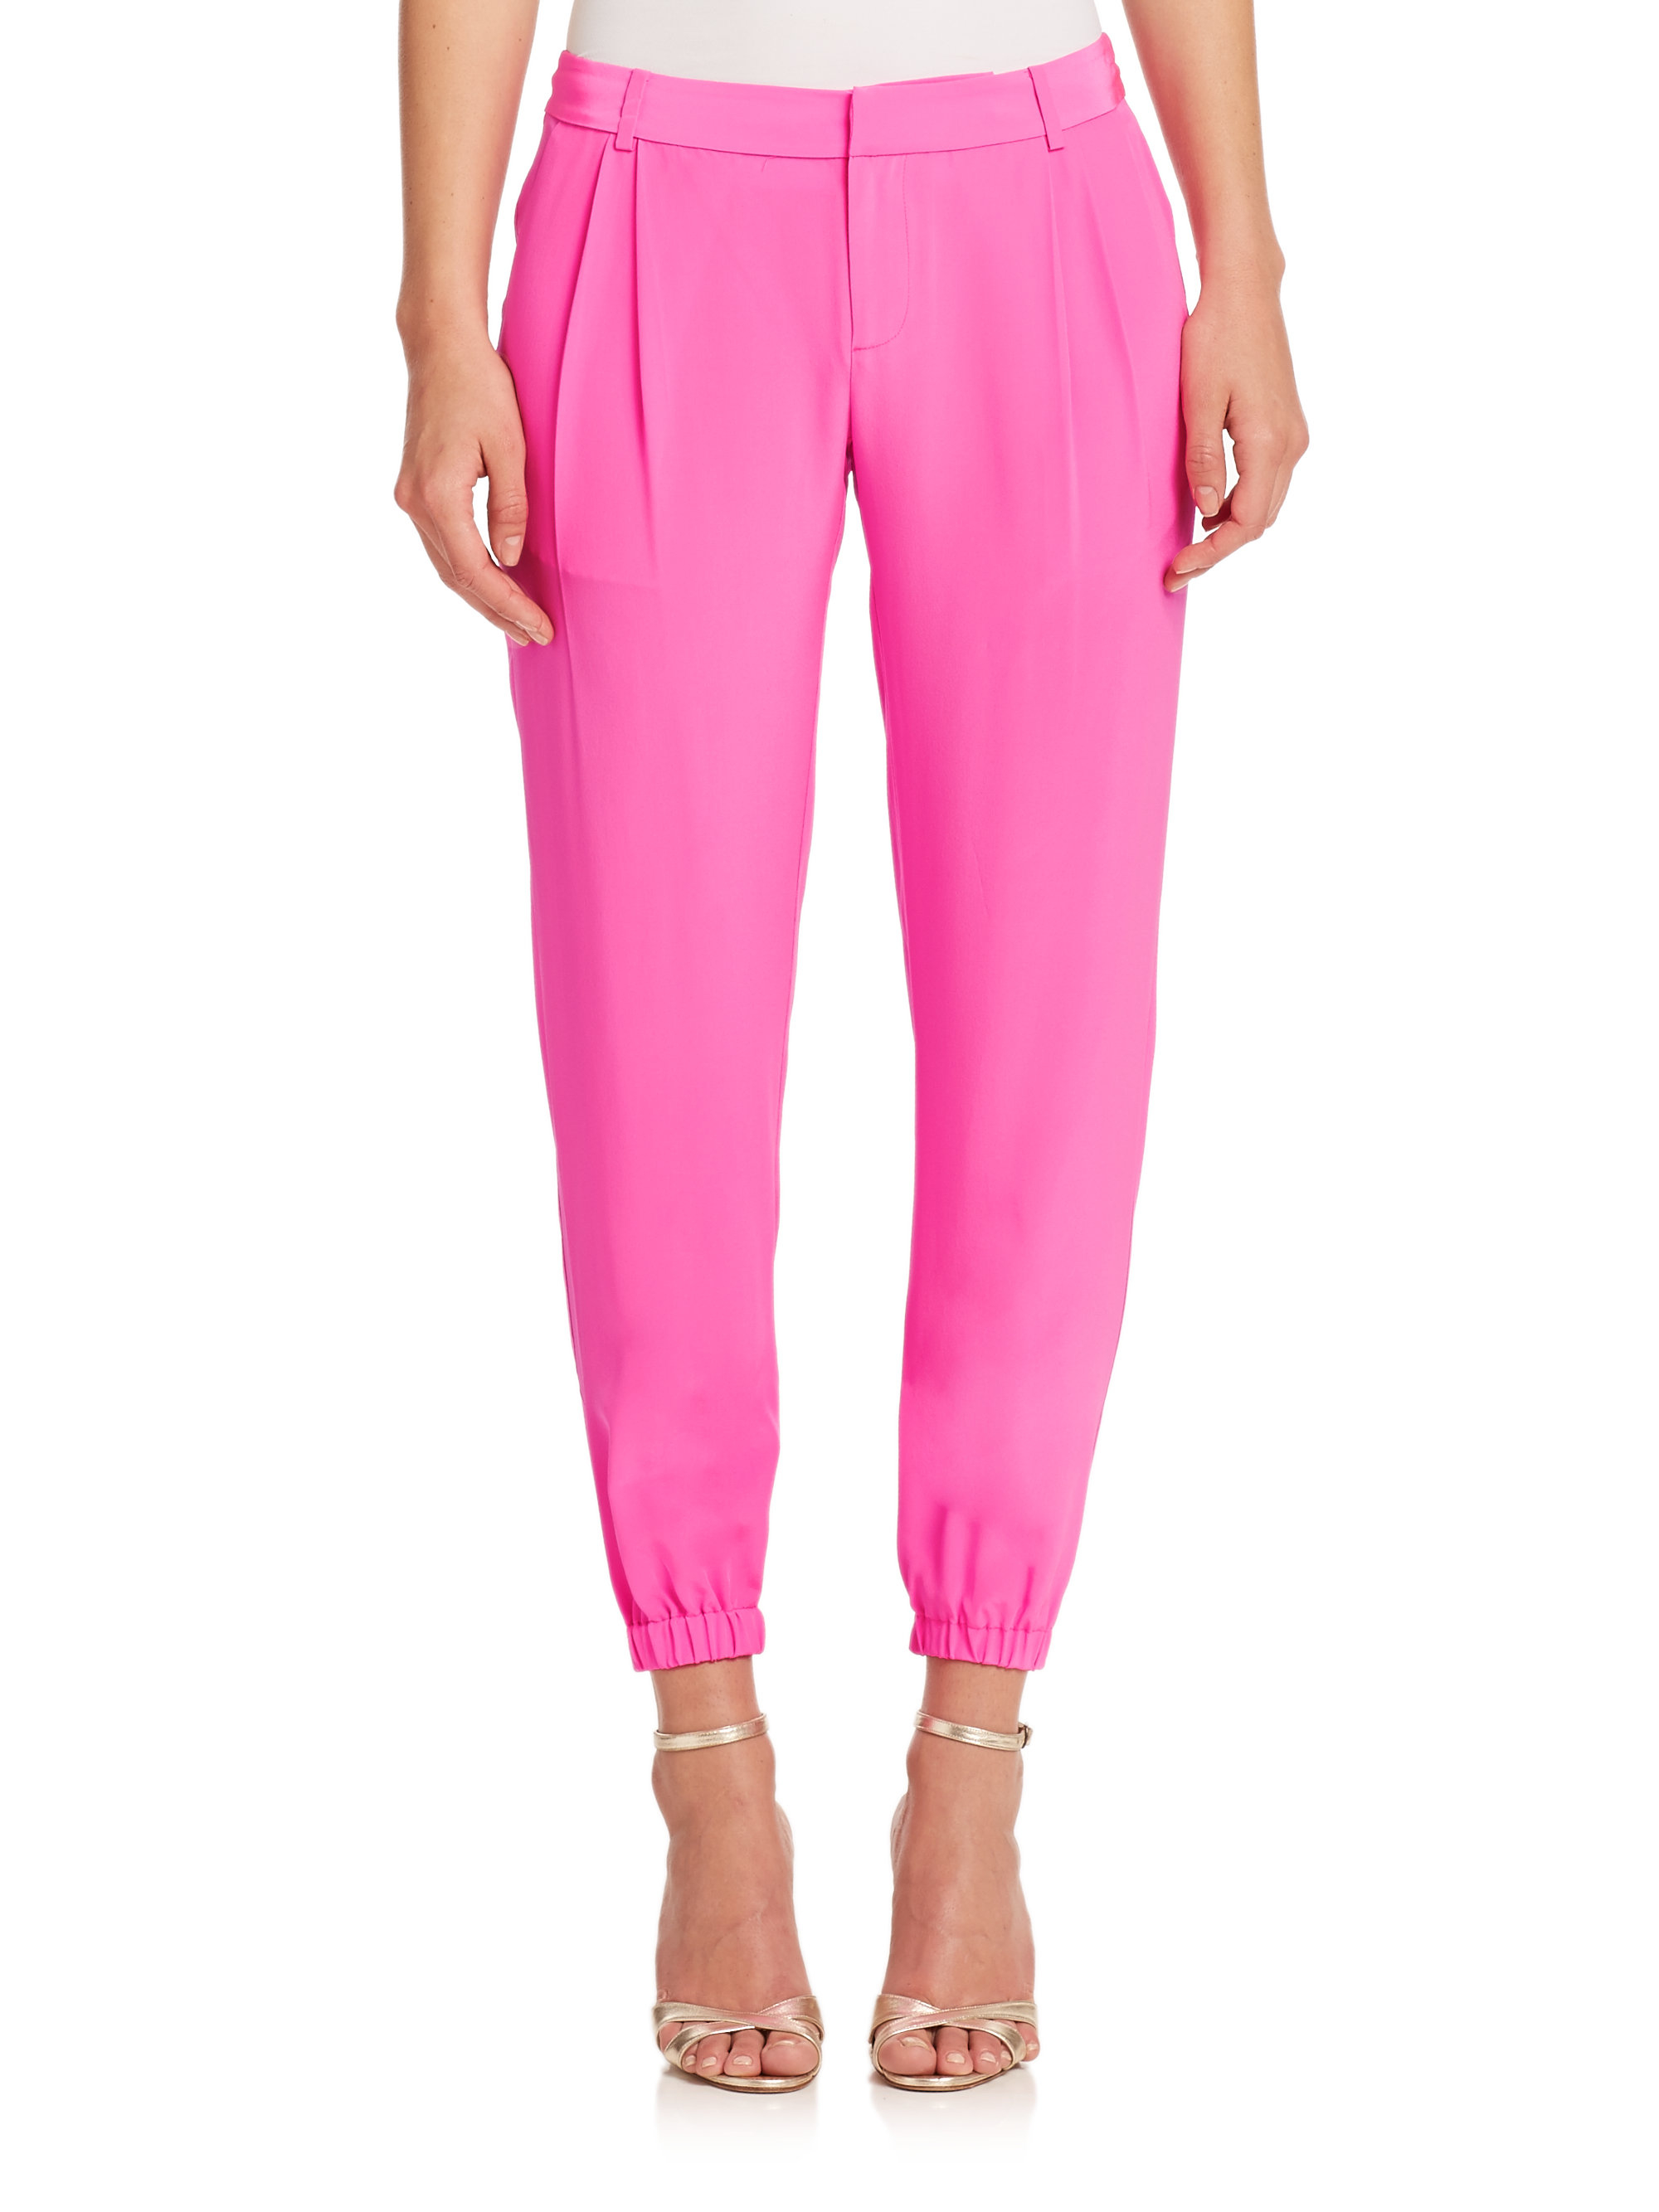 Lyst - Lilly pulitzer Solstice Silk Ankle Pants in Pink